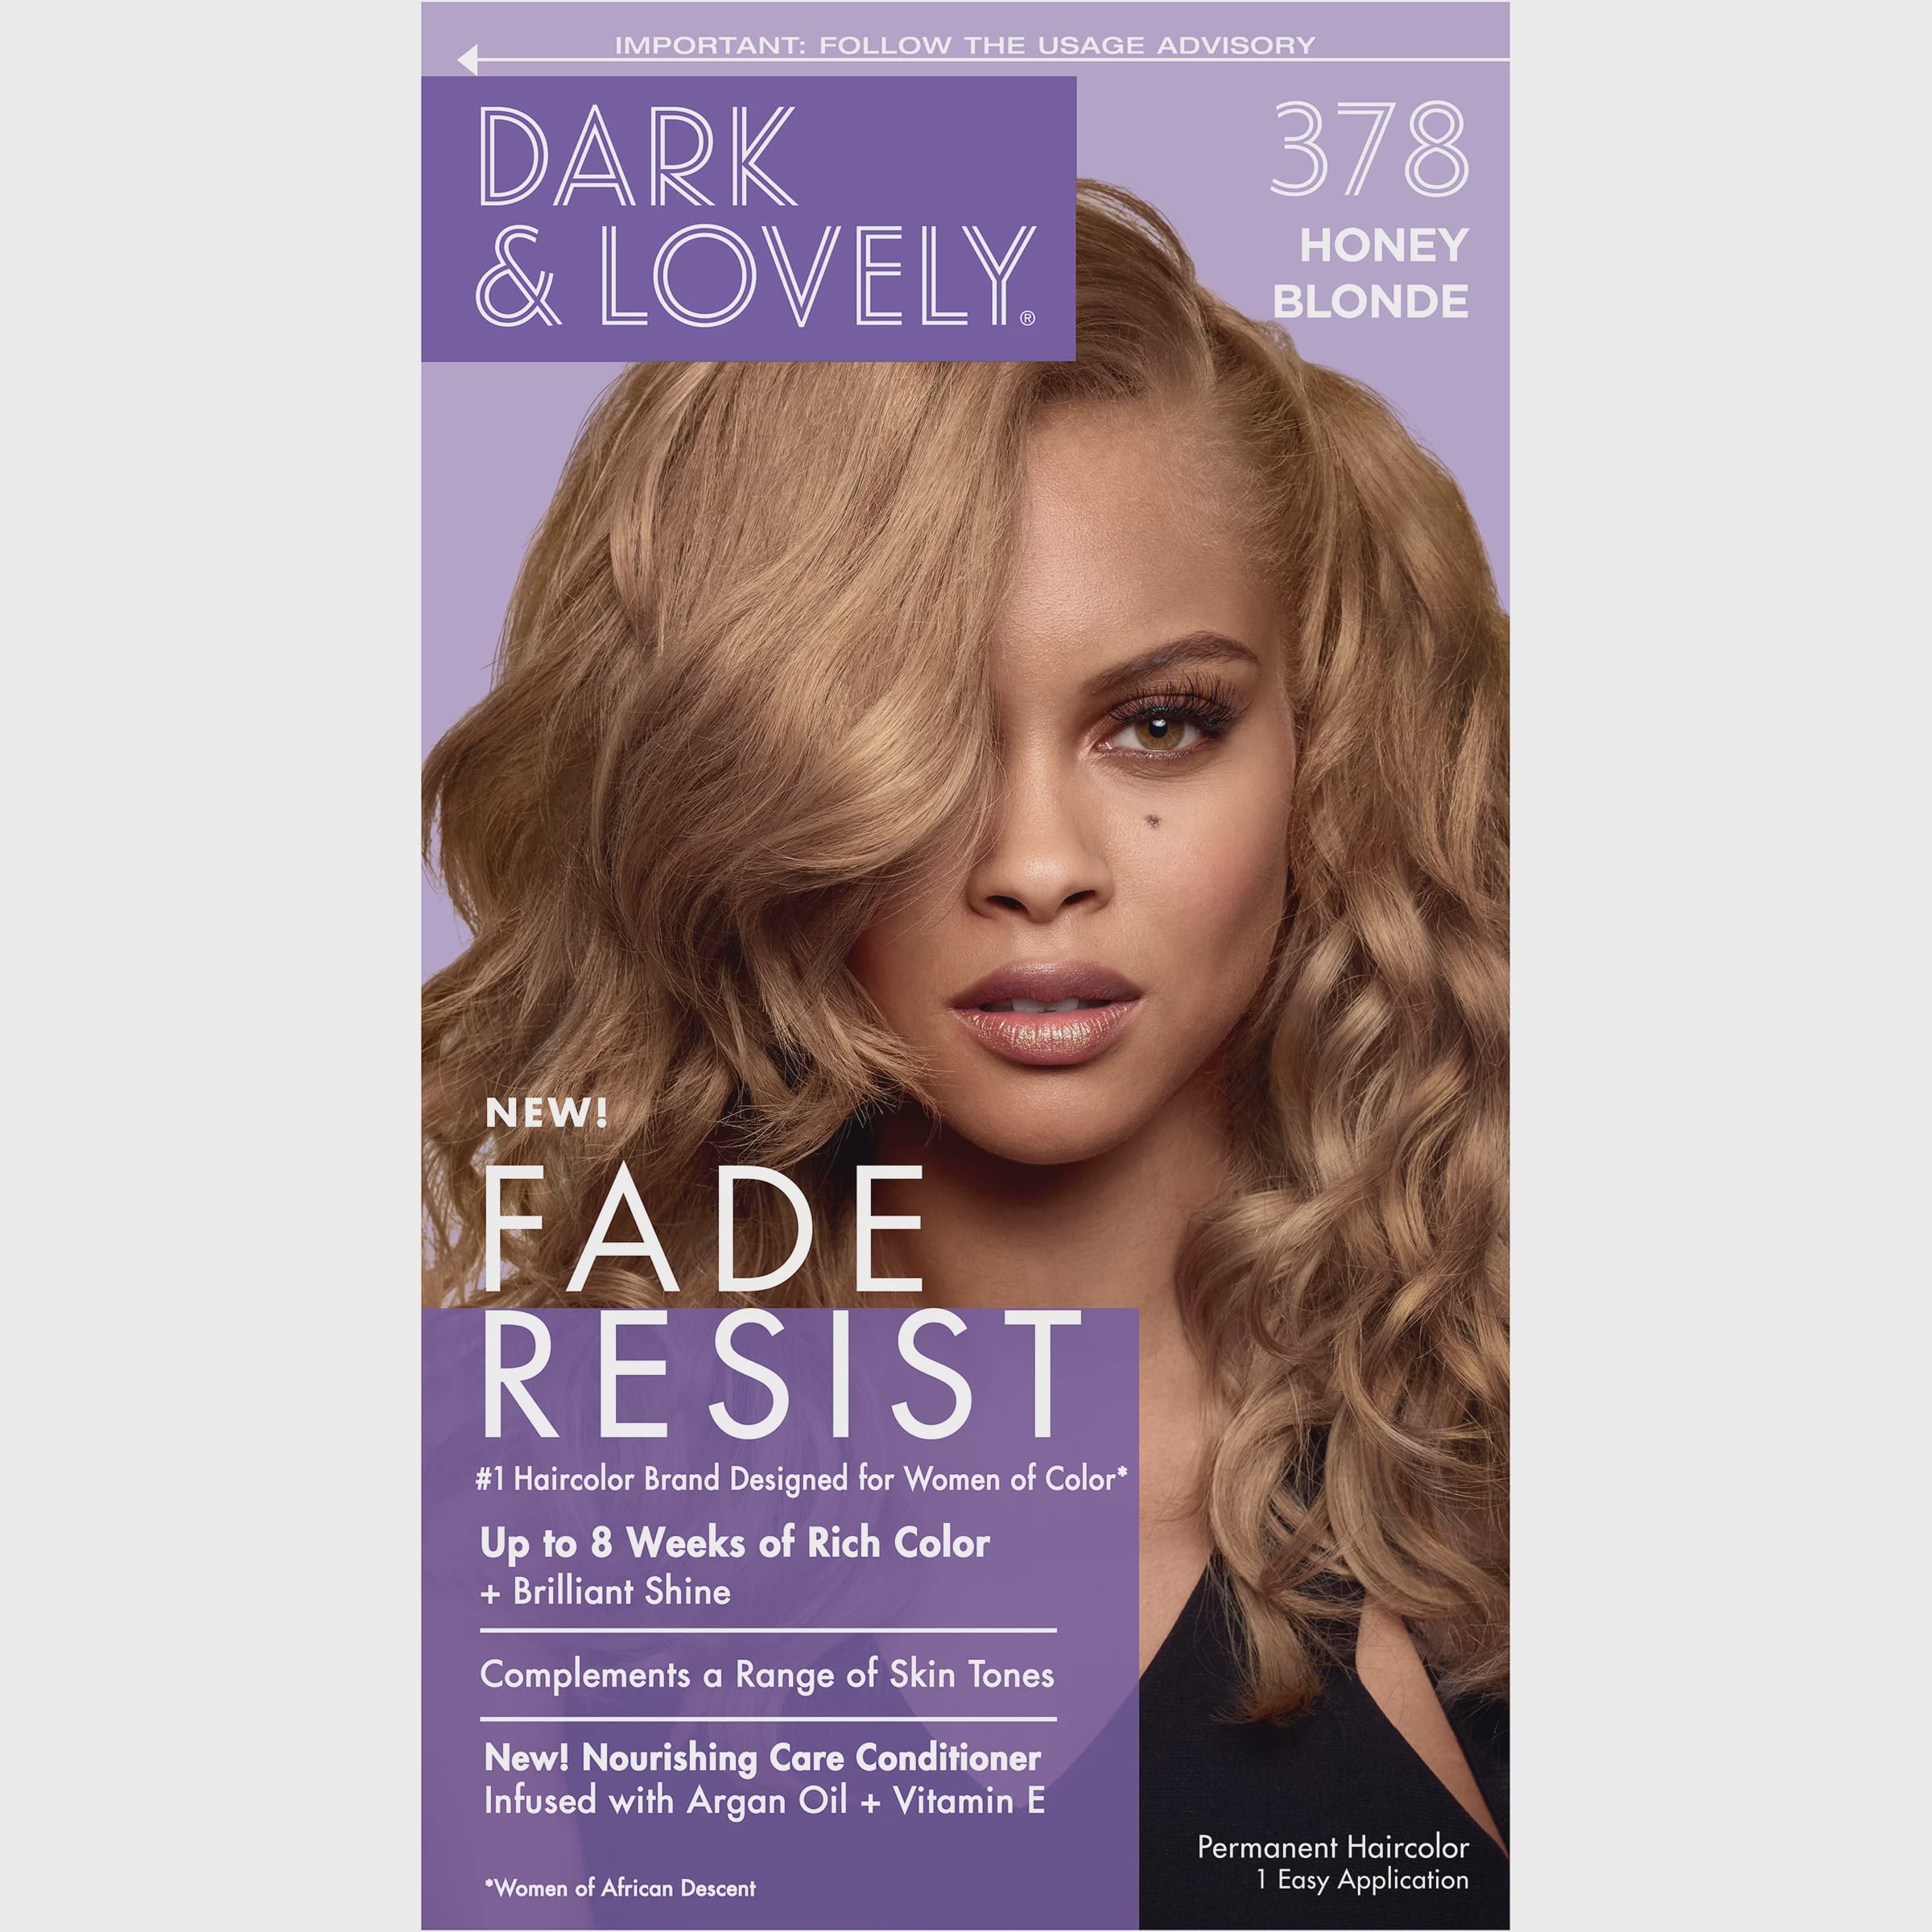 SoftSheen-Carson Resist Hair Lovely Color, Dark Fade 378 Blonde Honey and